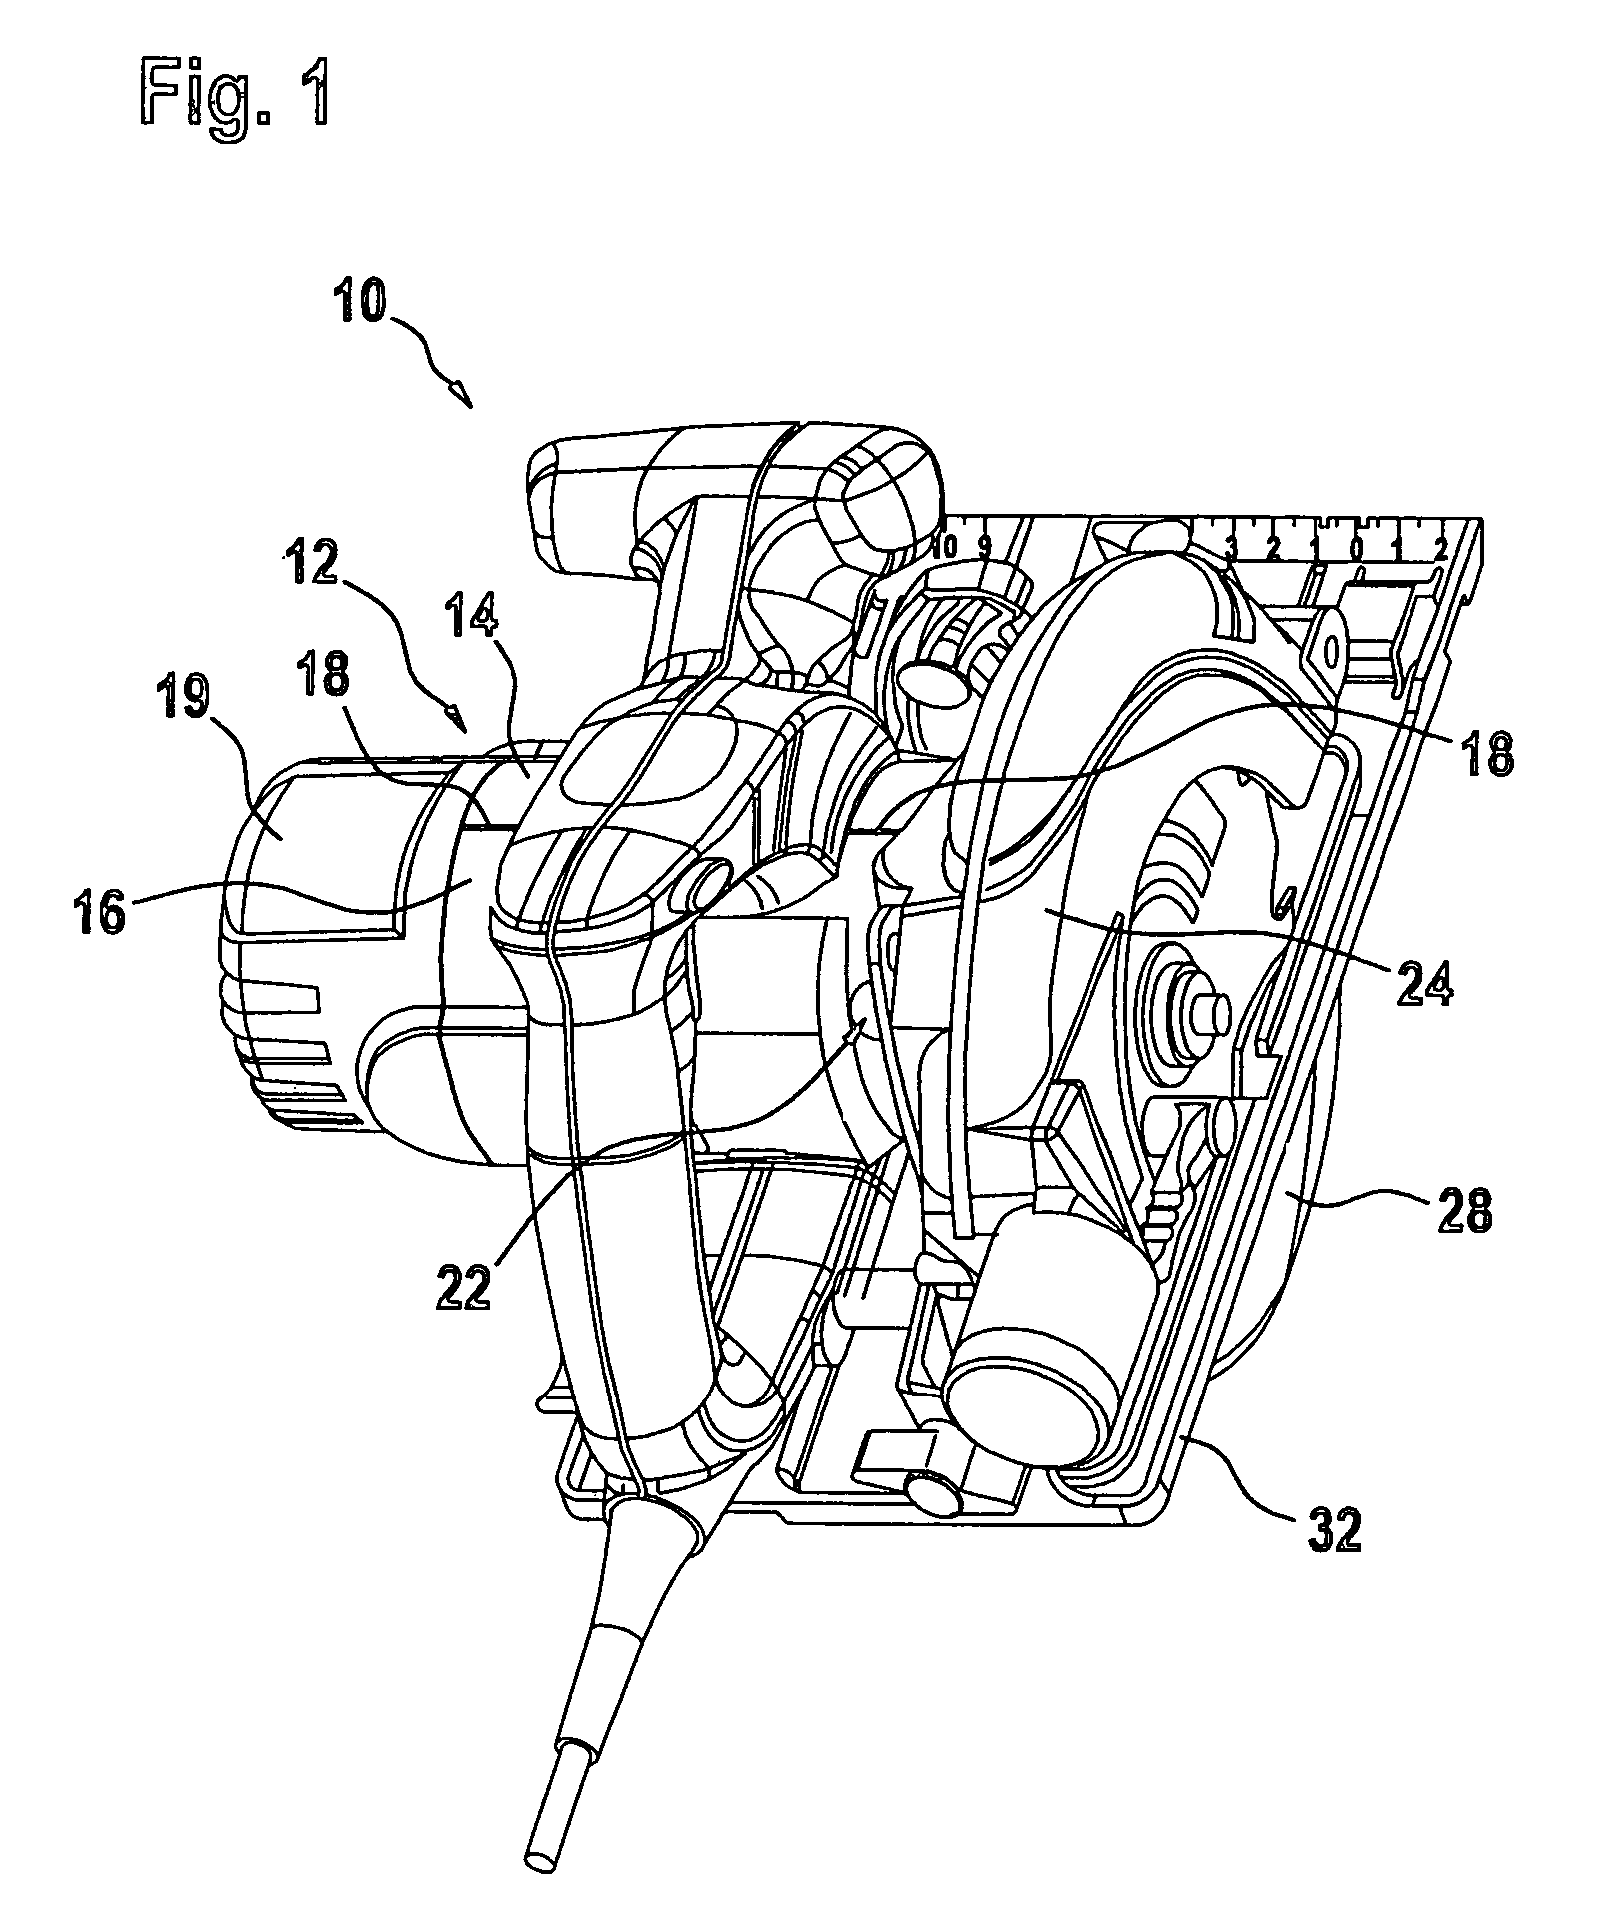 Sealing element for housing of a hand power tool